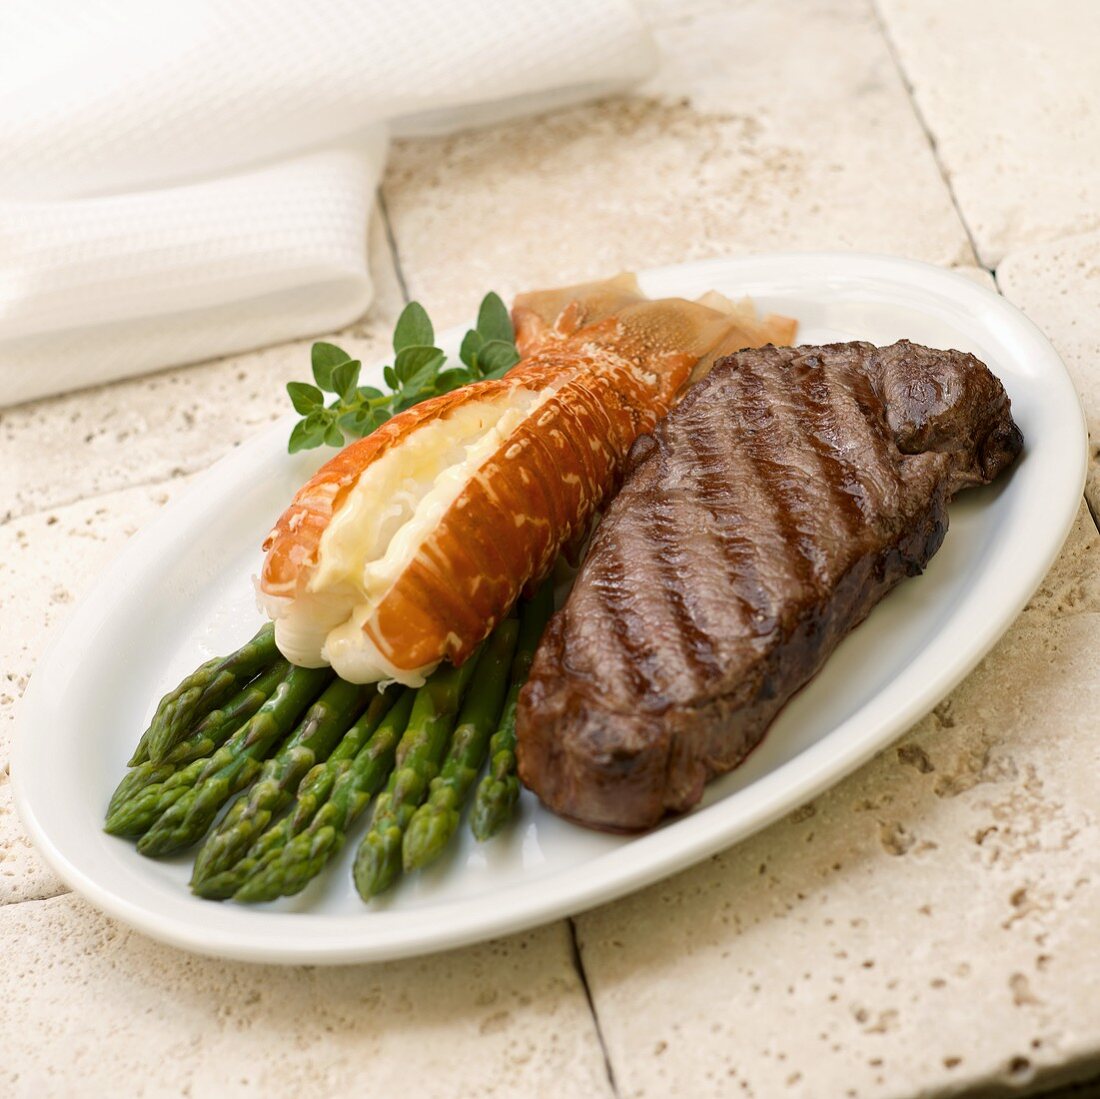 Surf and Turf: Grilled NY Strip Steak with Lobster Tail and Asparagus